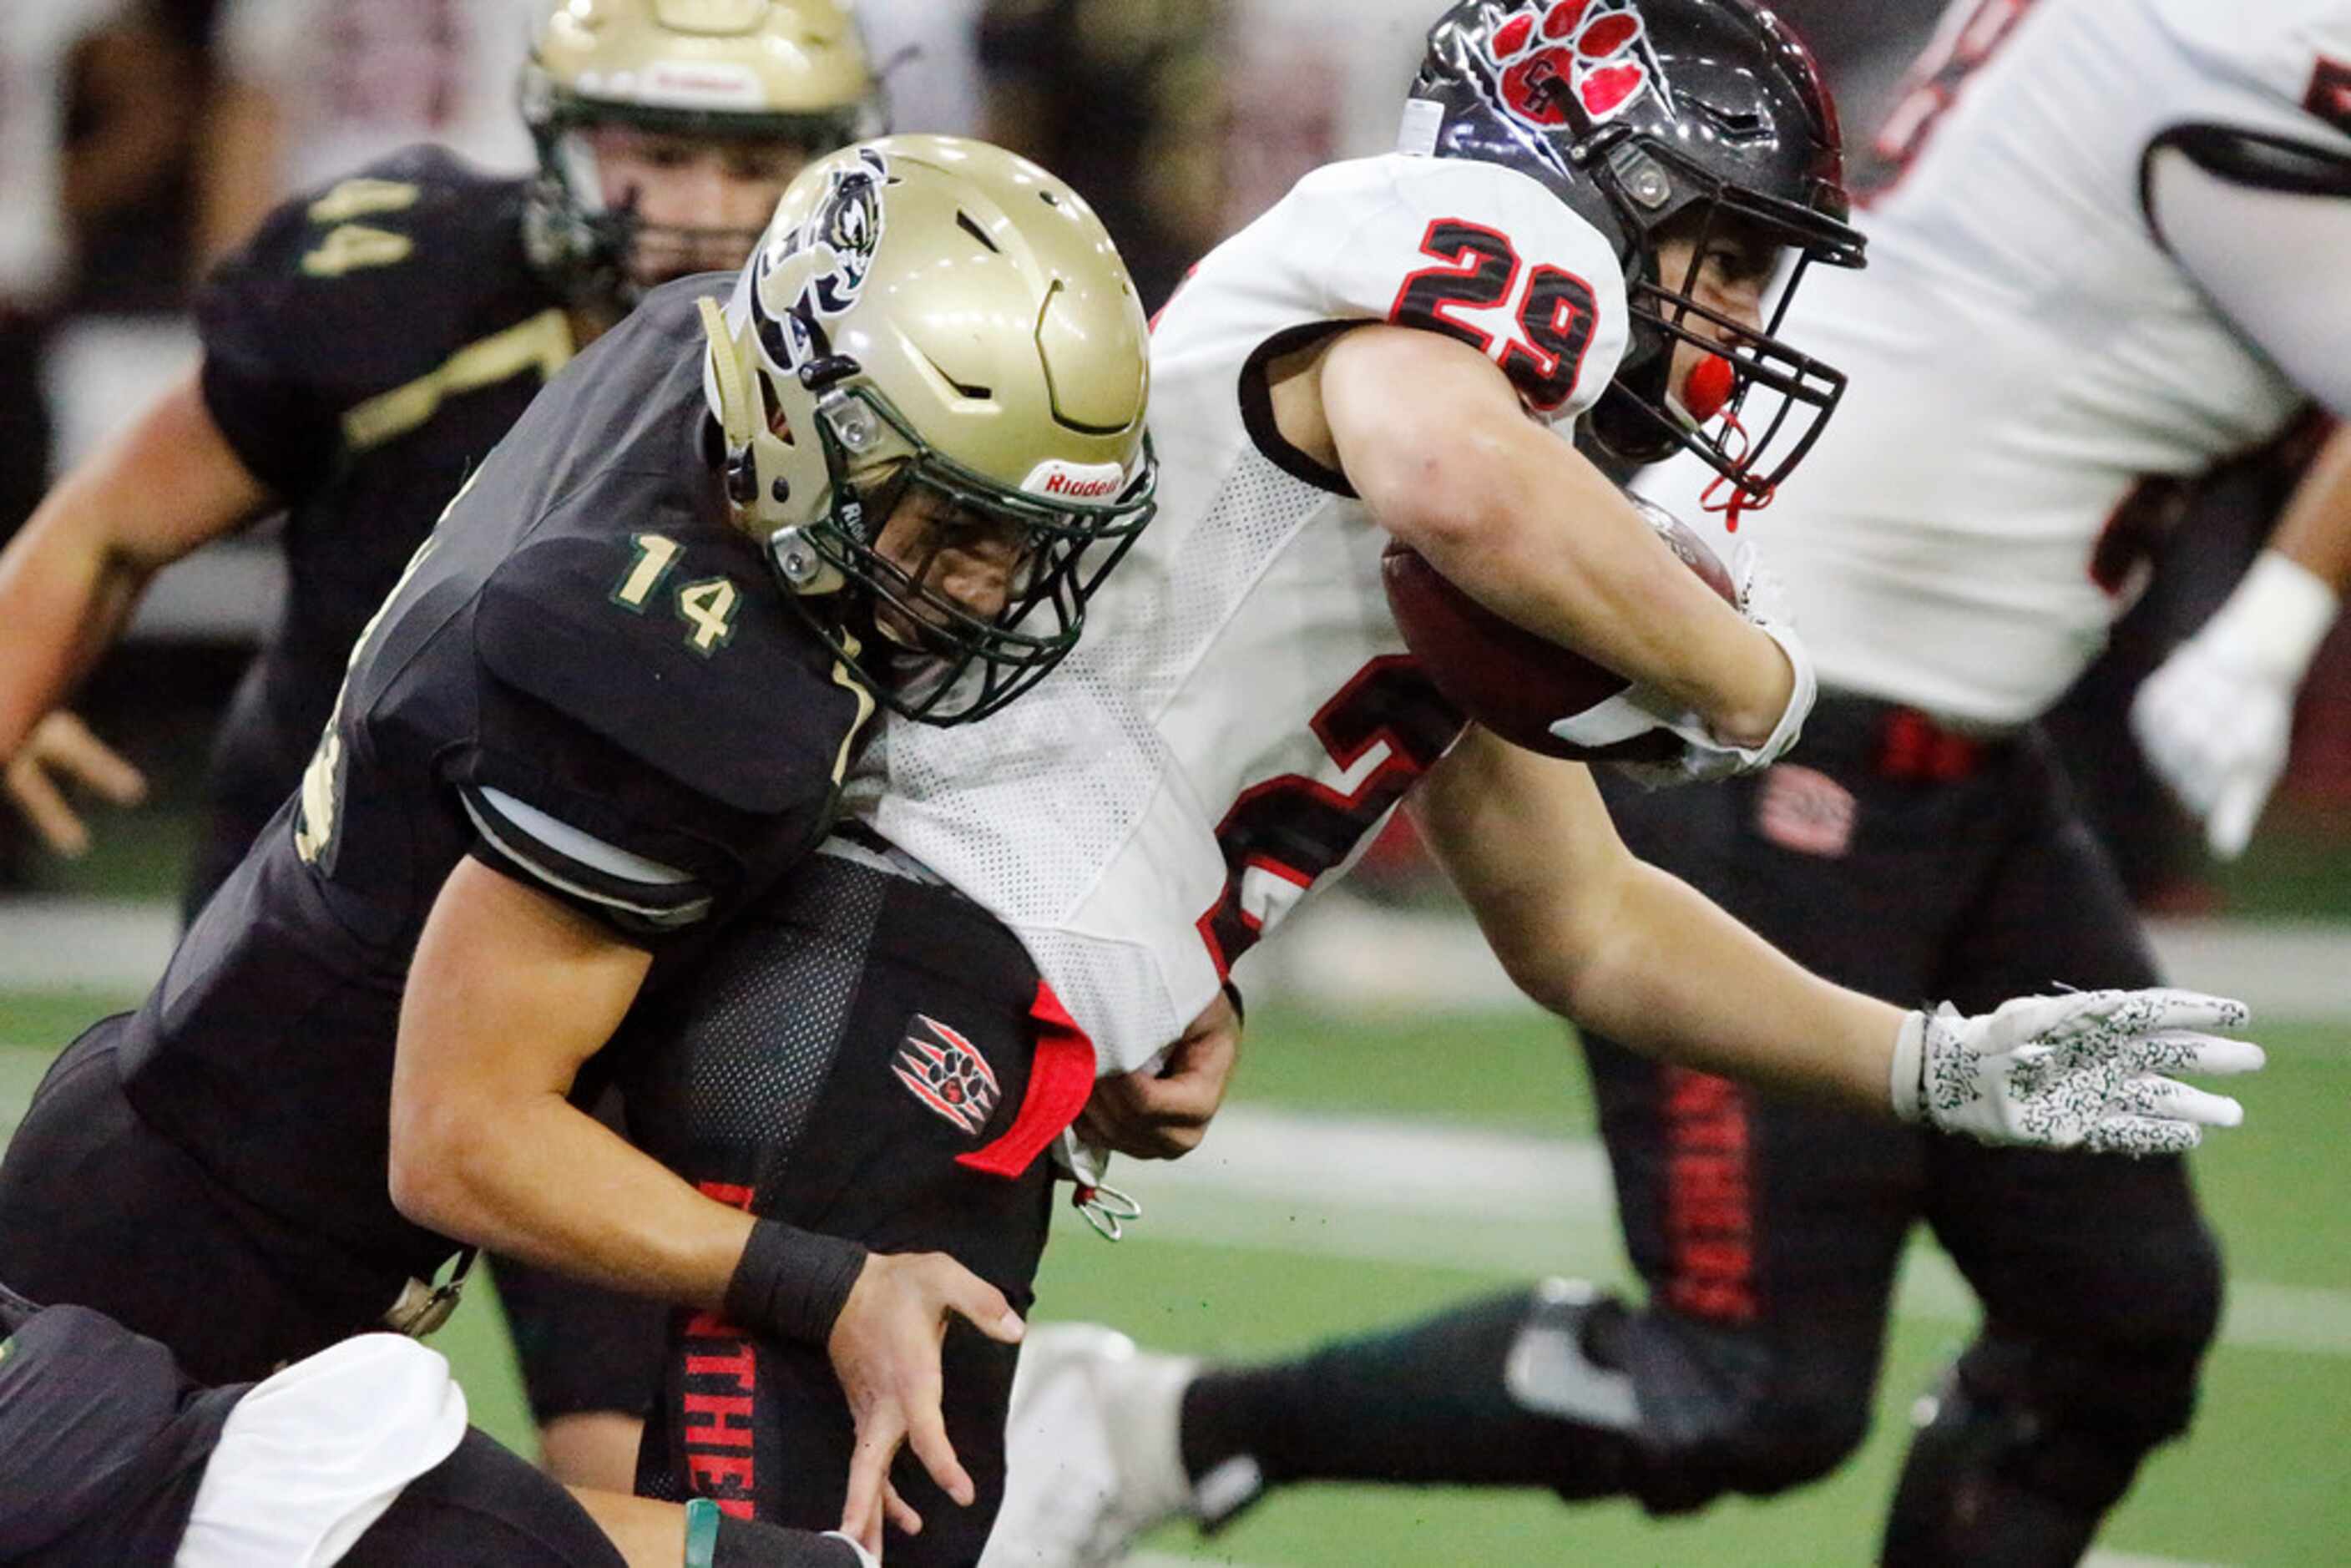 Colleyville Heritage High School running back Braxton Ash (29) is tackled by Birdville High...